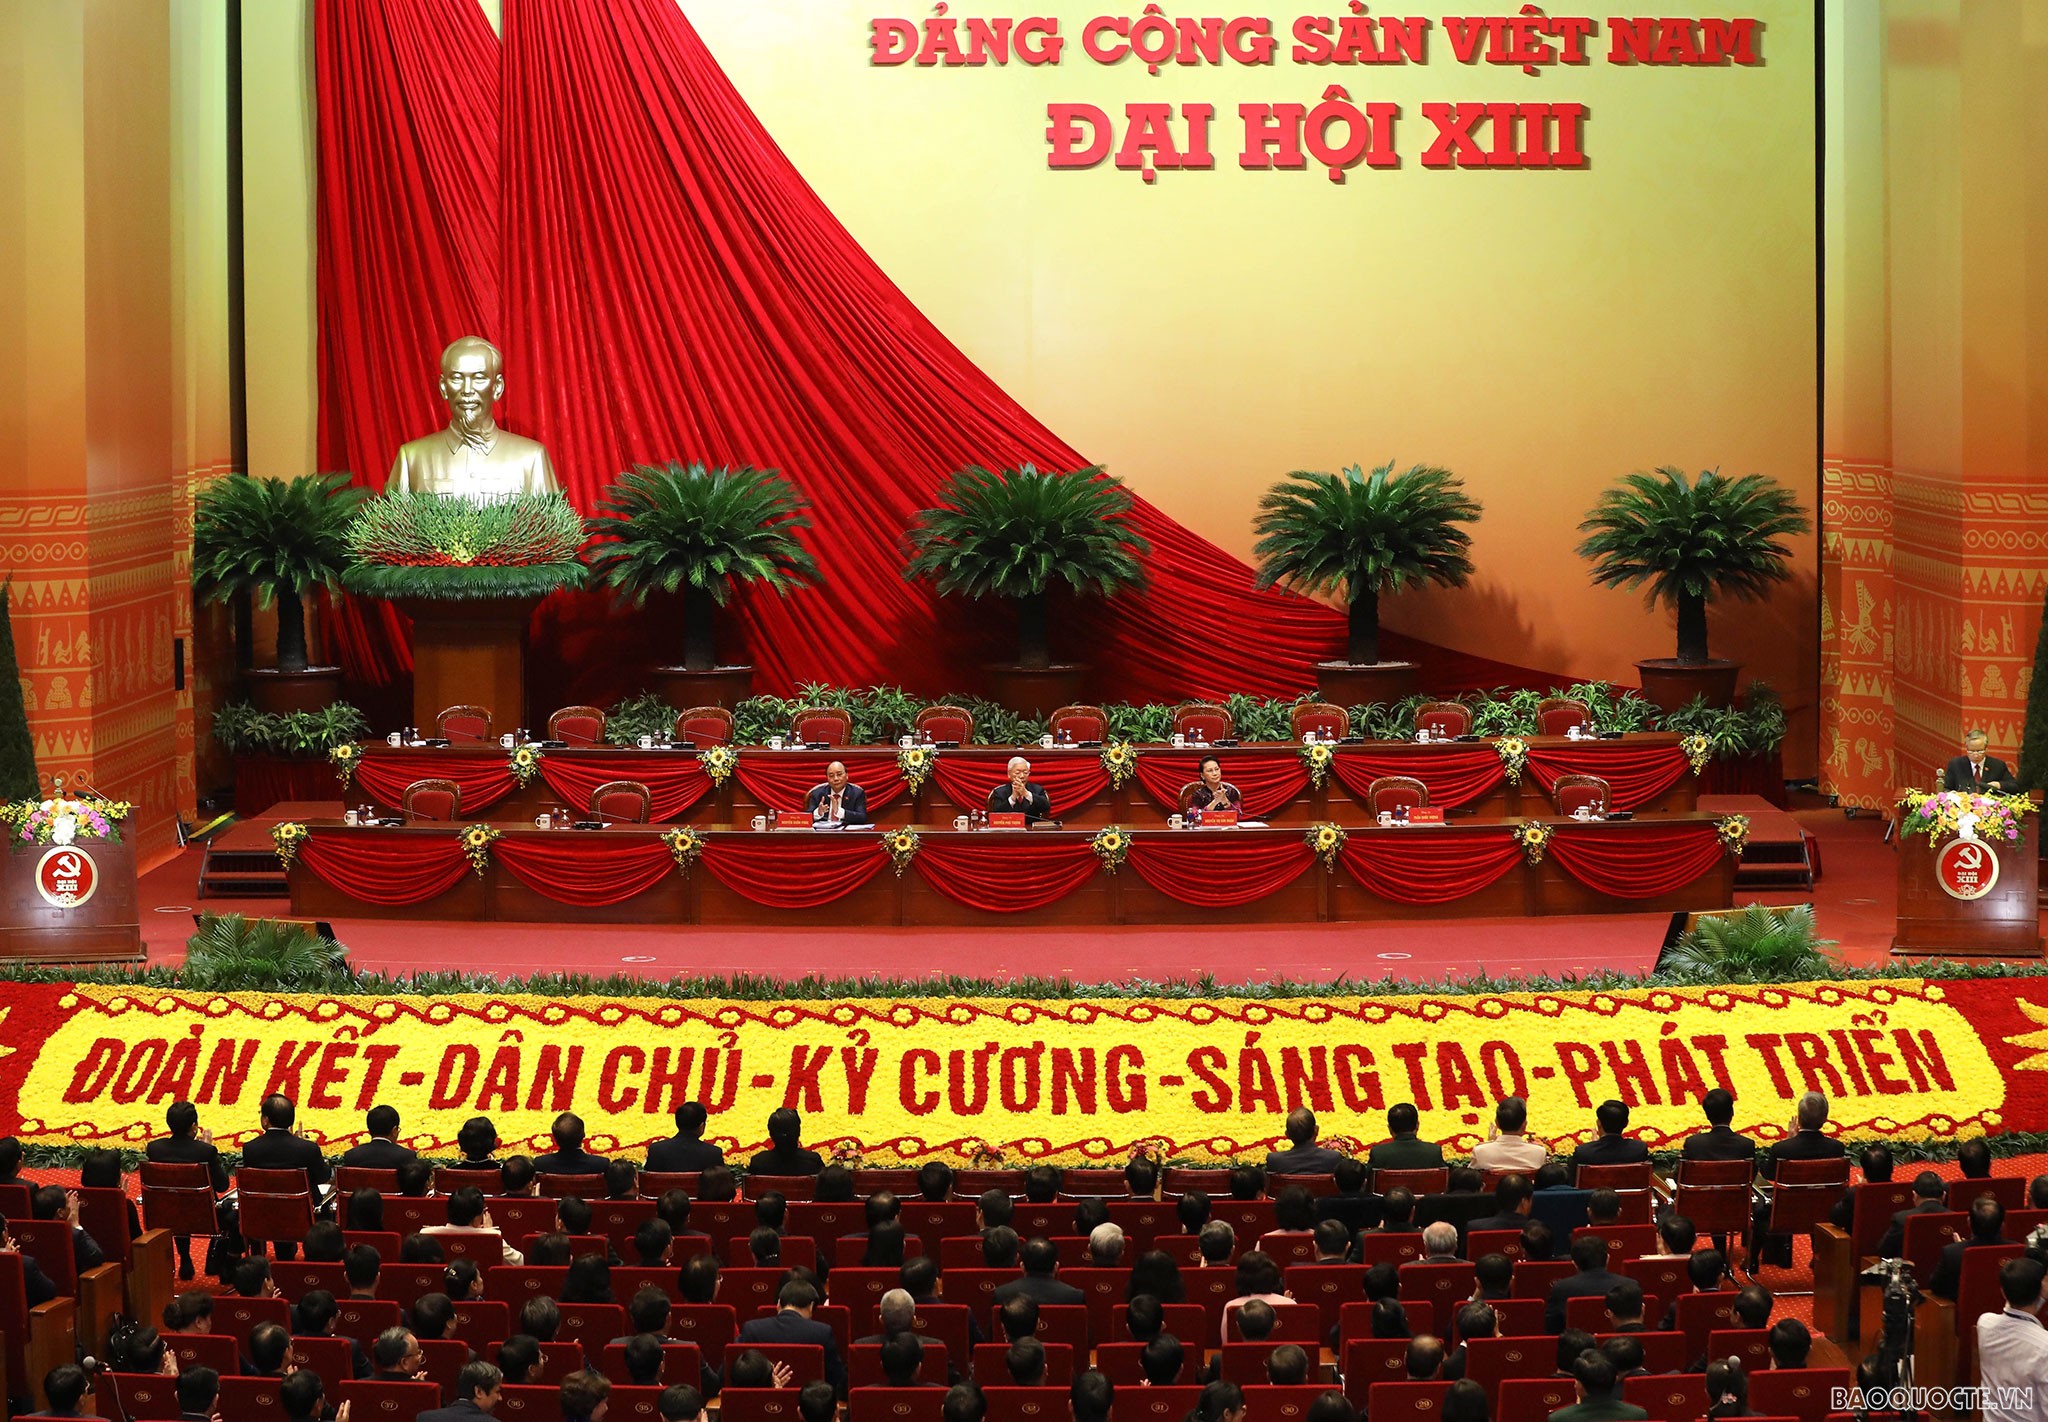 Overseas Vietnamese express strong belief to polices to be adopted at National Party Congress